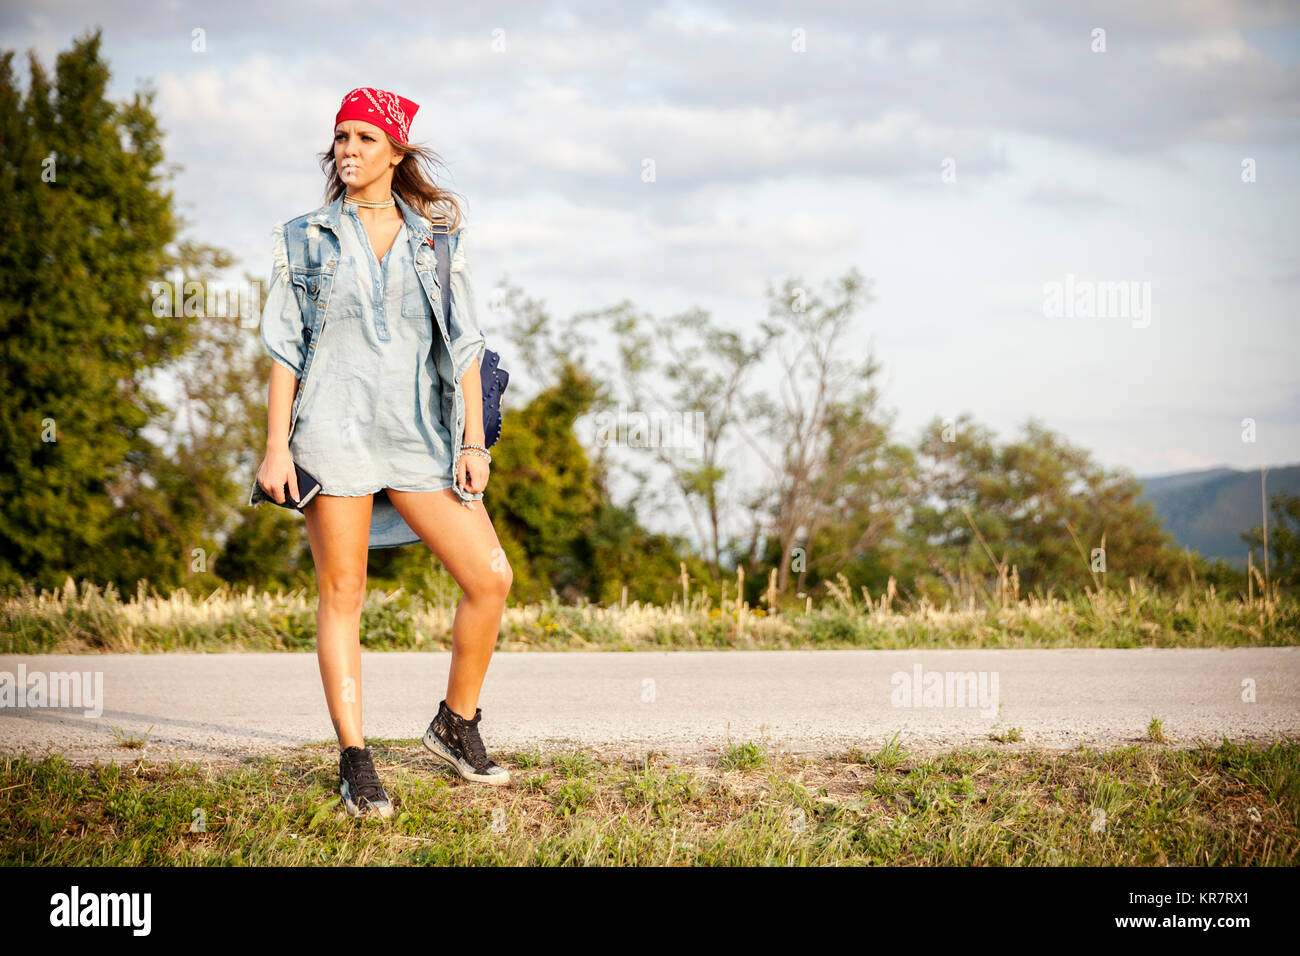 young woman hitchhiking on a country road Stock Photo